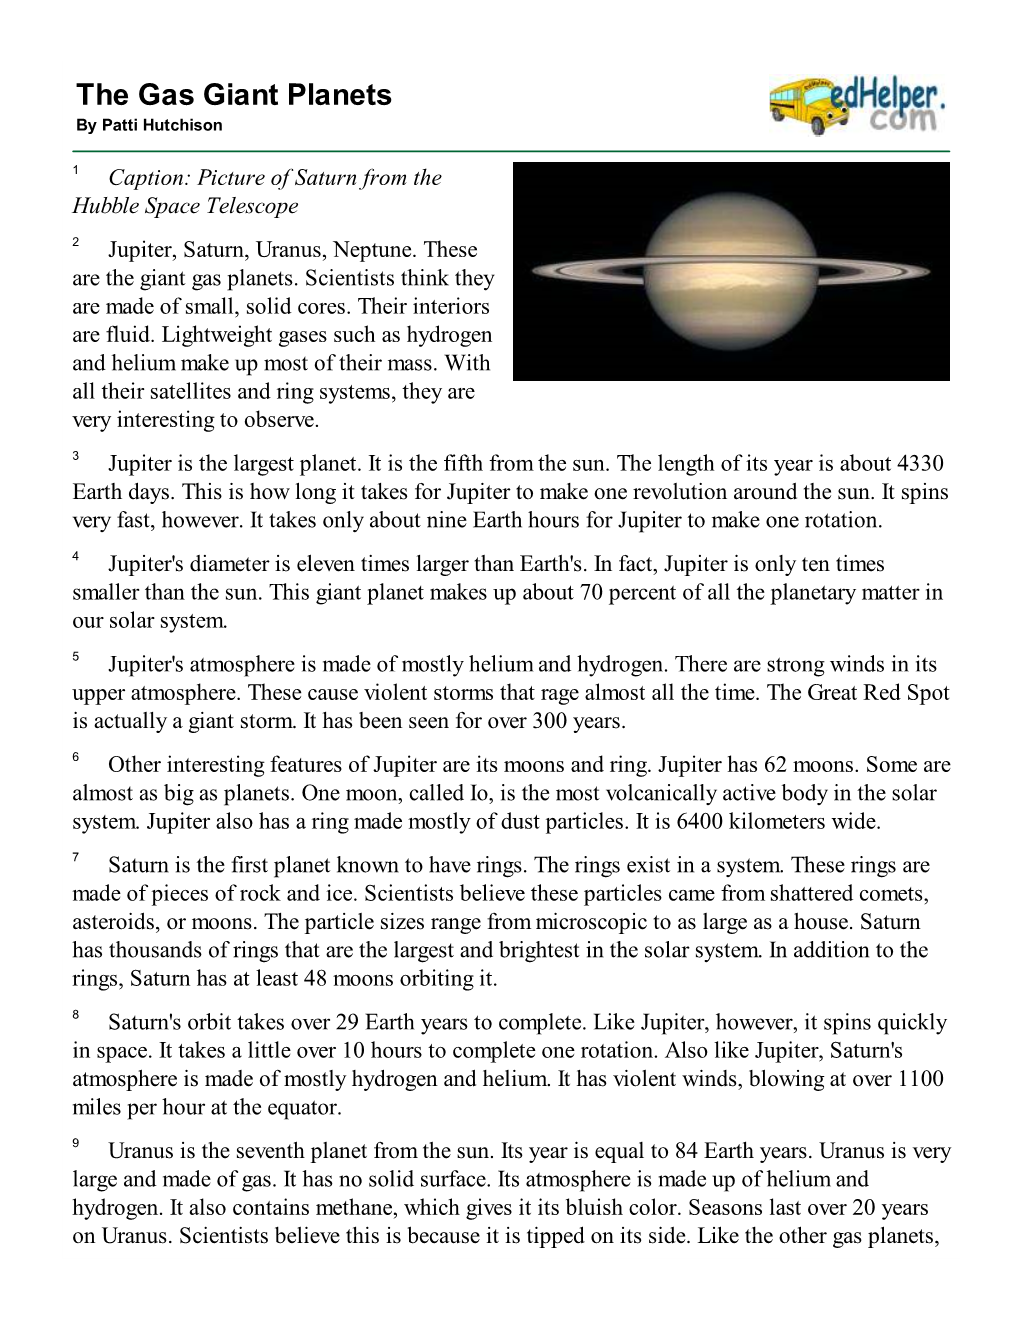 The Gas Giant Planets by Patti Hutchison